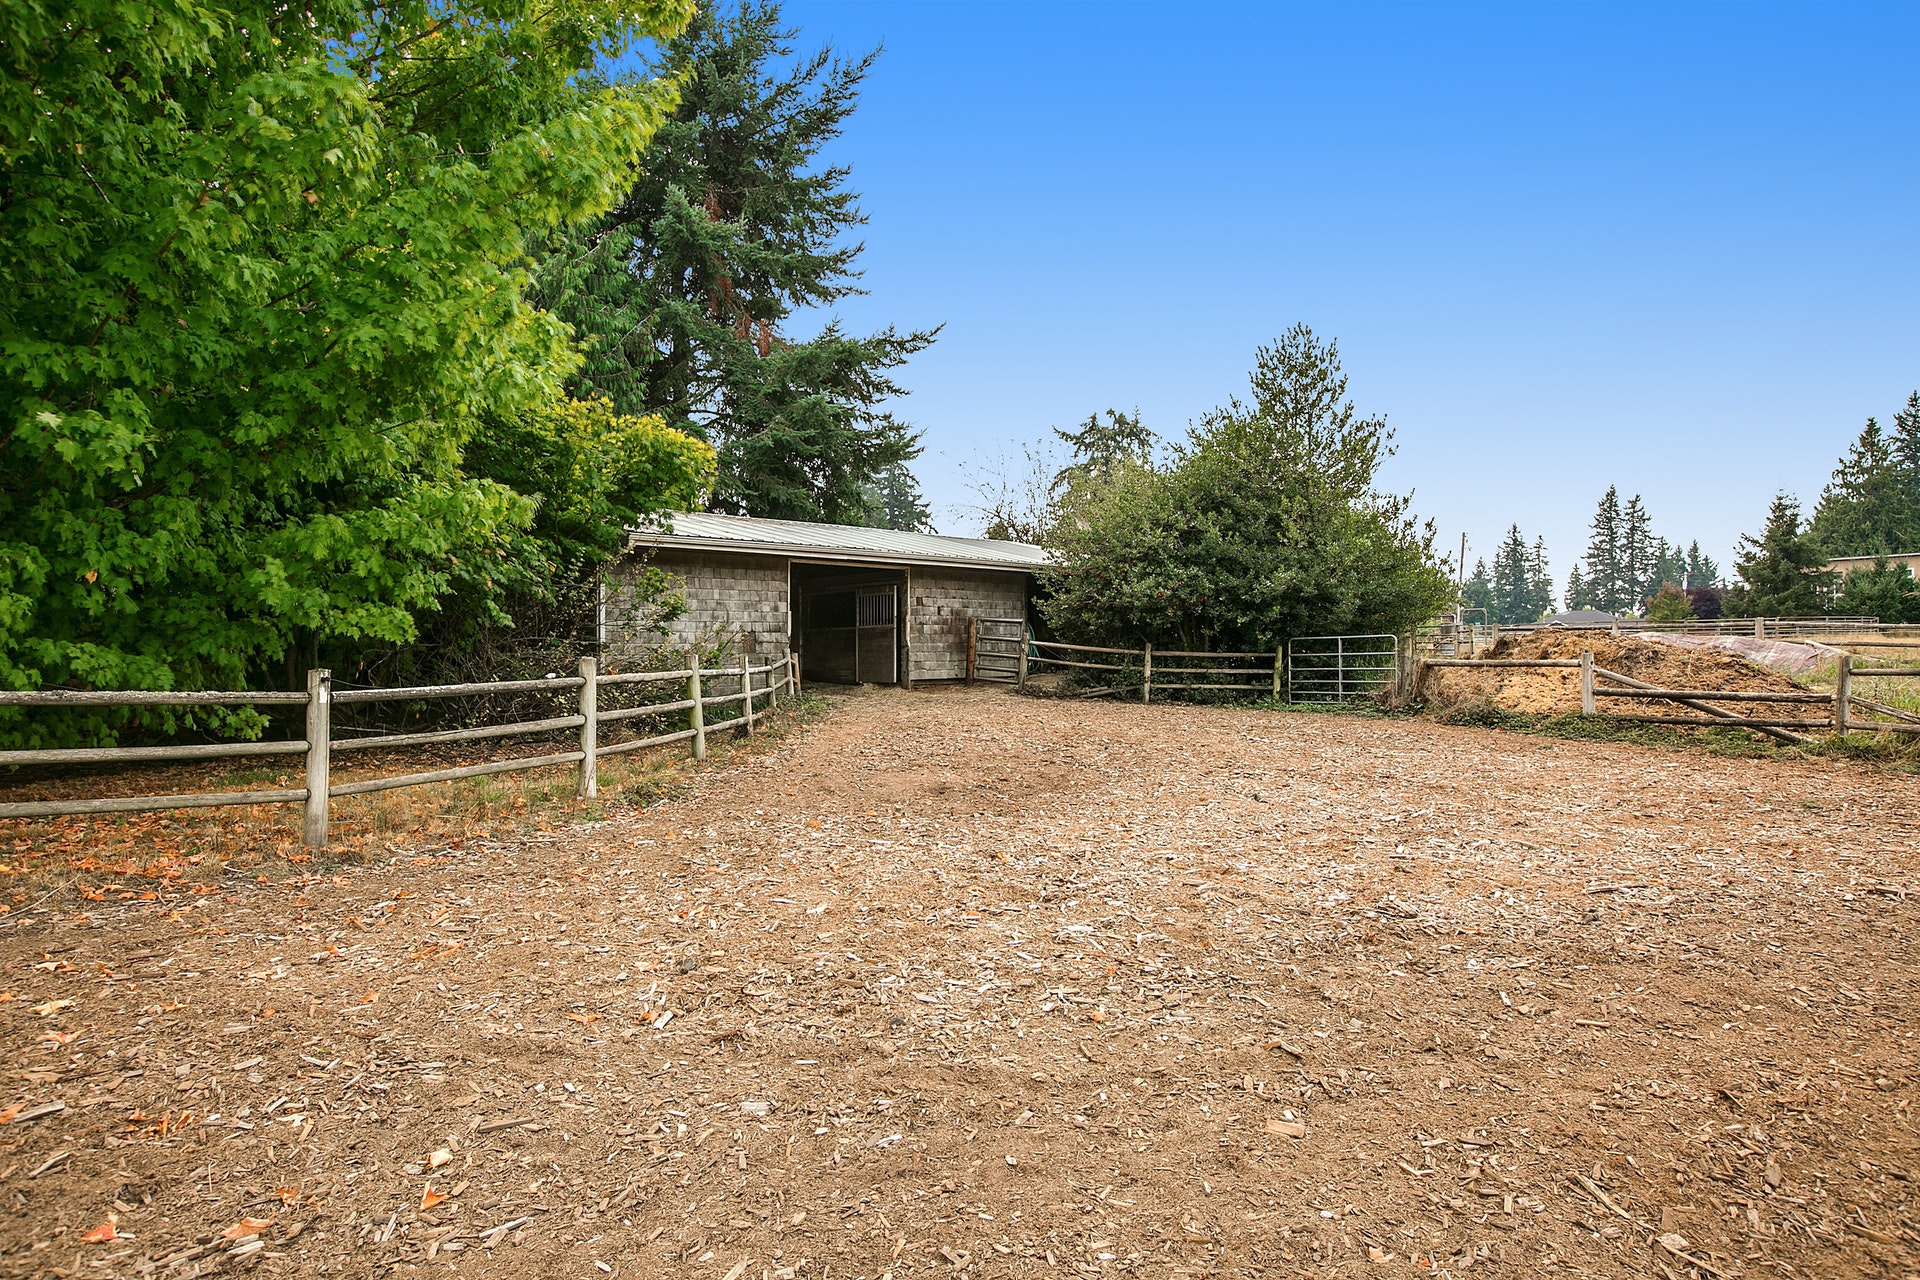 From the paddock to the back of the barn. Barn contains two well designed stables.